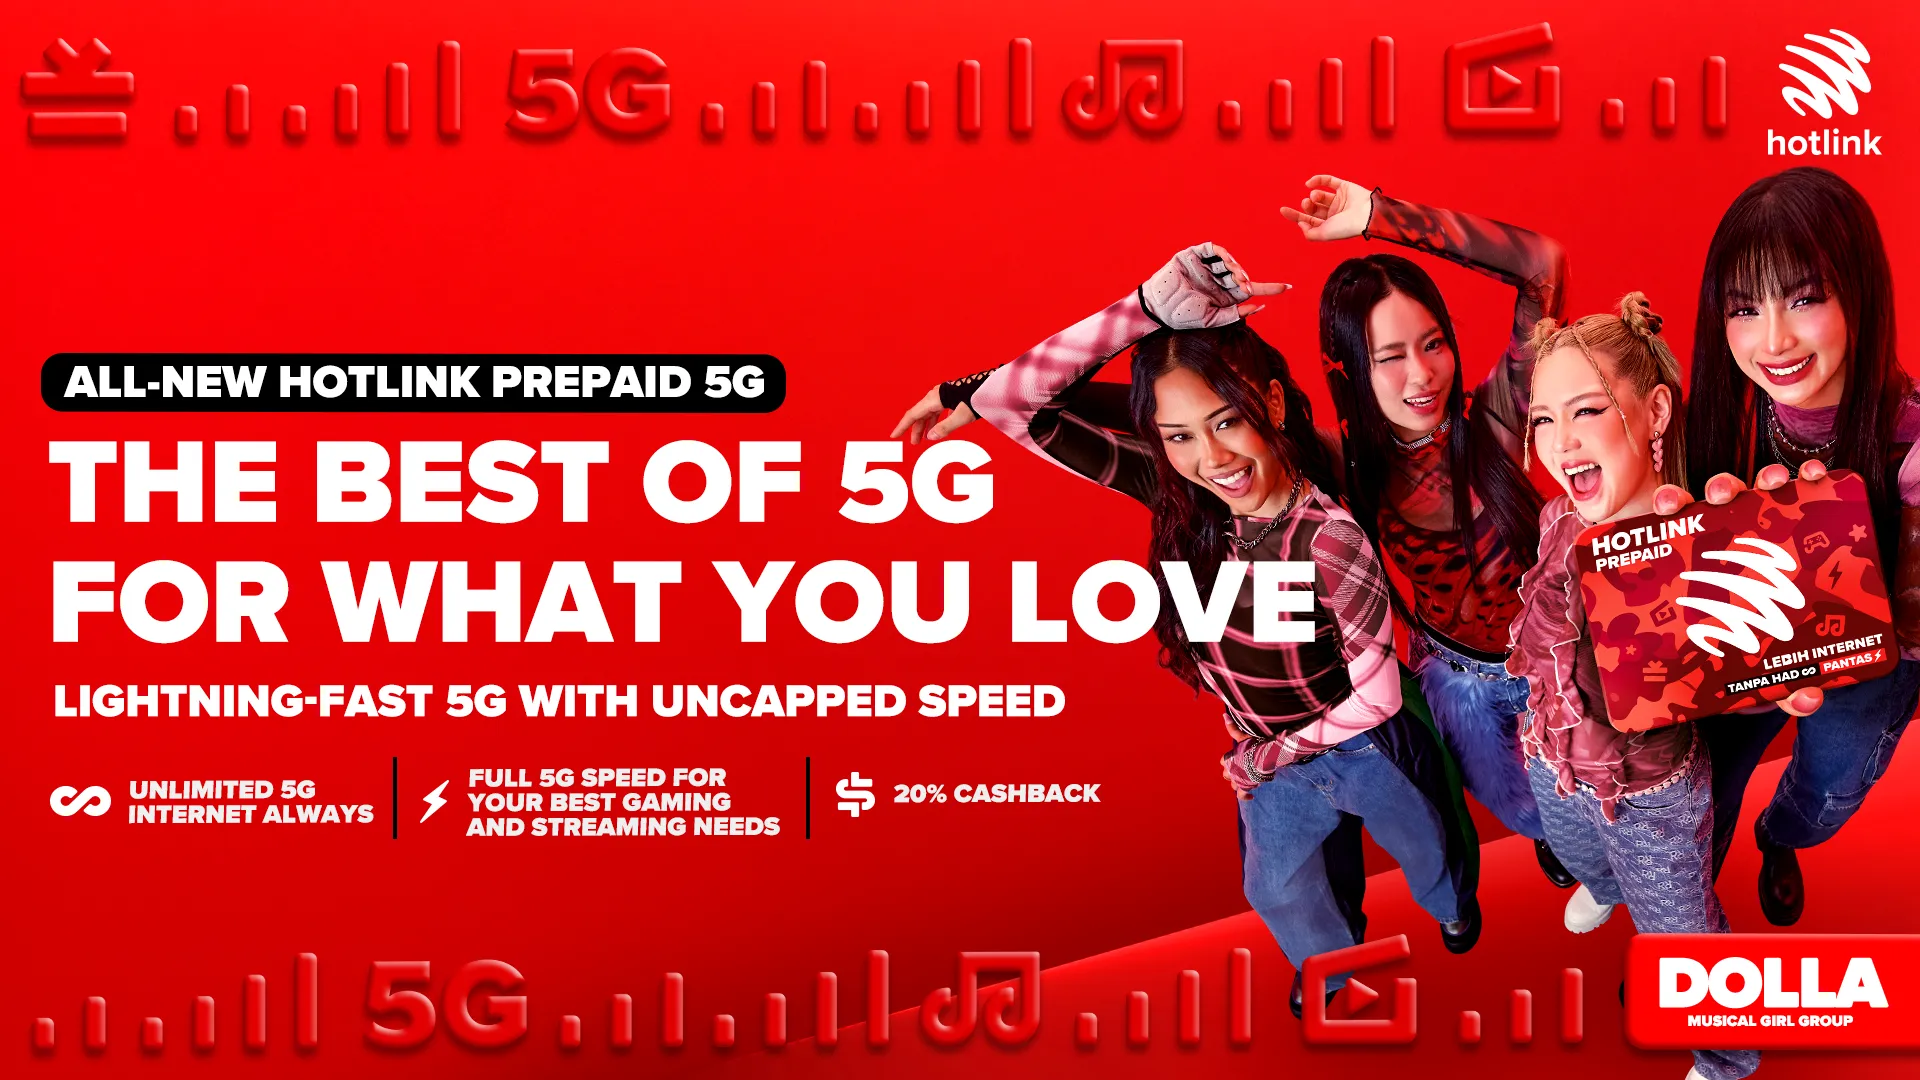 Hotlink enriches Prepaid and Postpaid plans with 5G across the board, even more data, and uncapped speeds